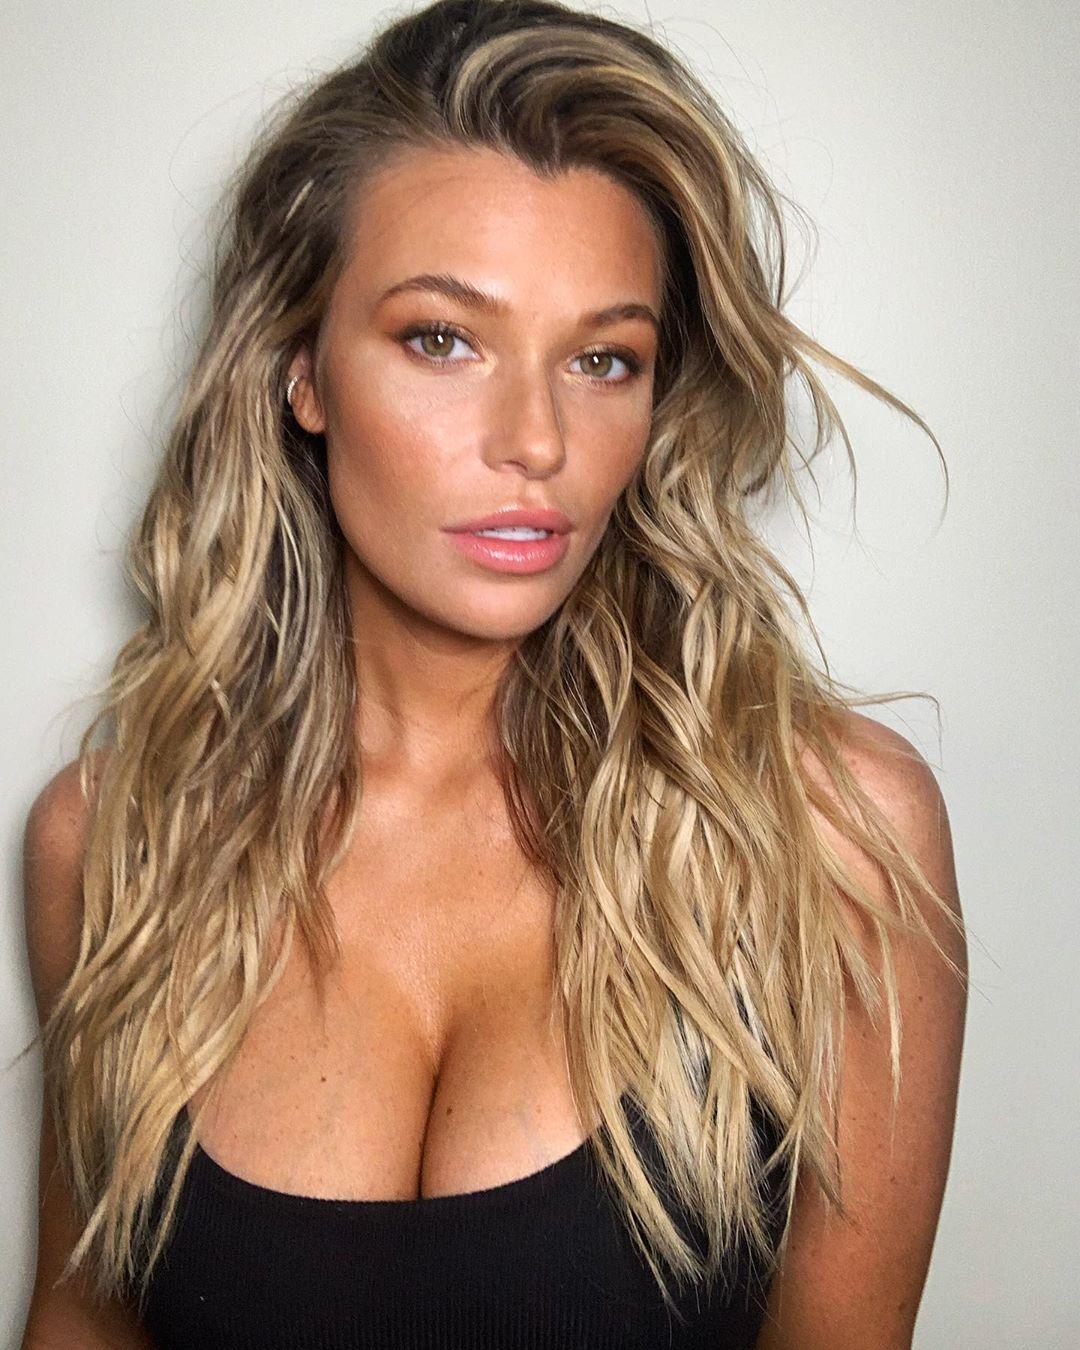 70+ Hot Pictures Of Samantha Hoopes Are Here To Take Your Breath Away 241